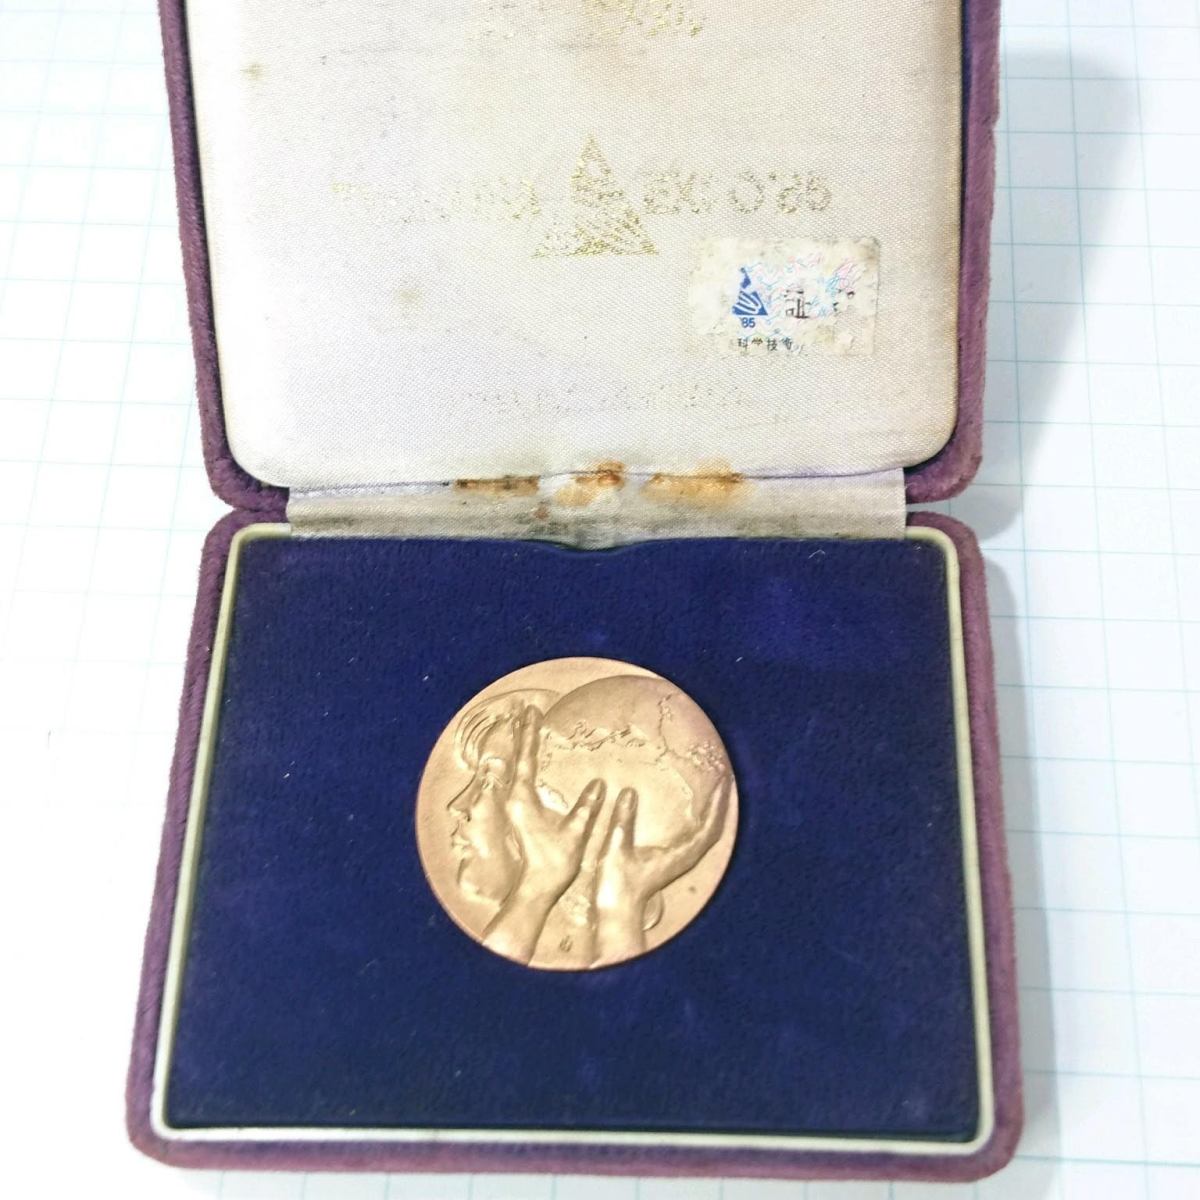  free shipping )EXPO85 international science technology . viewing . memory medal A08156